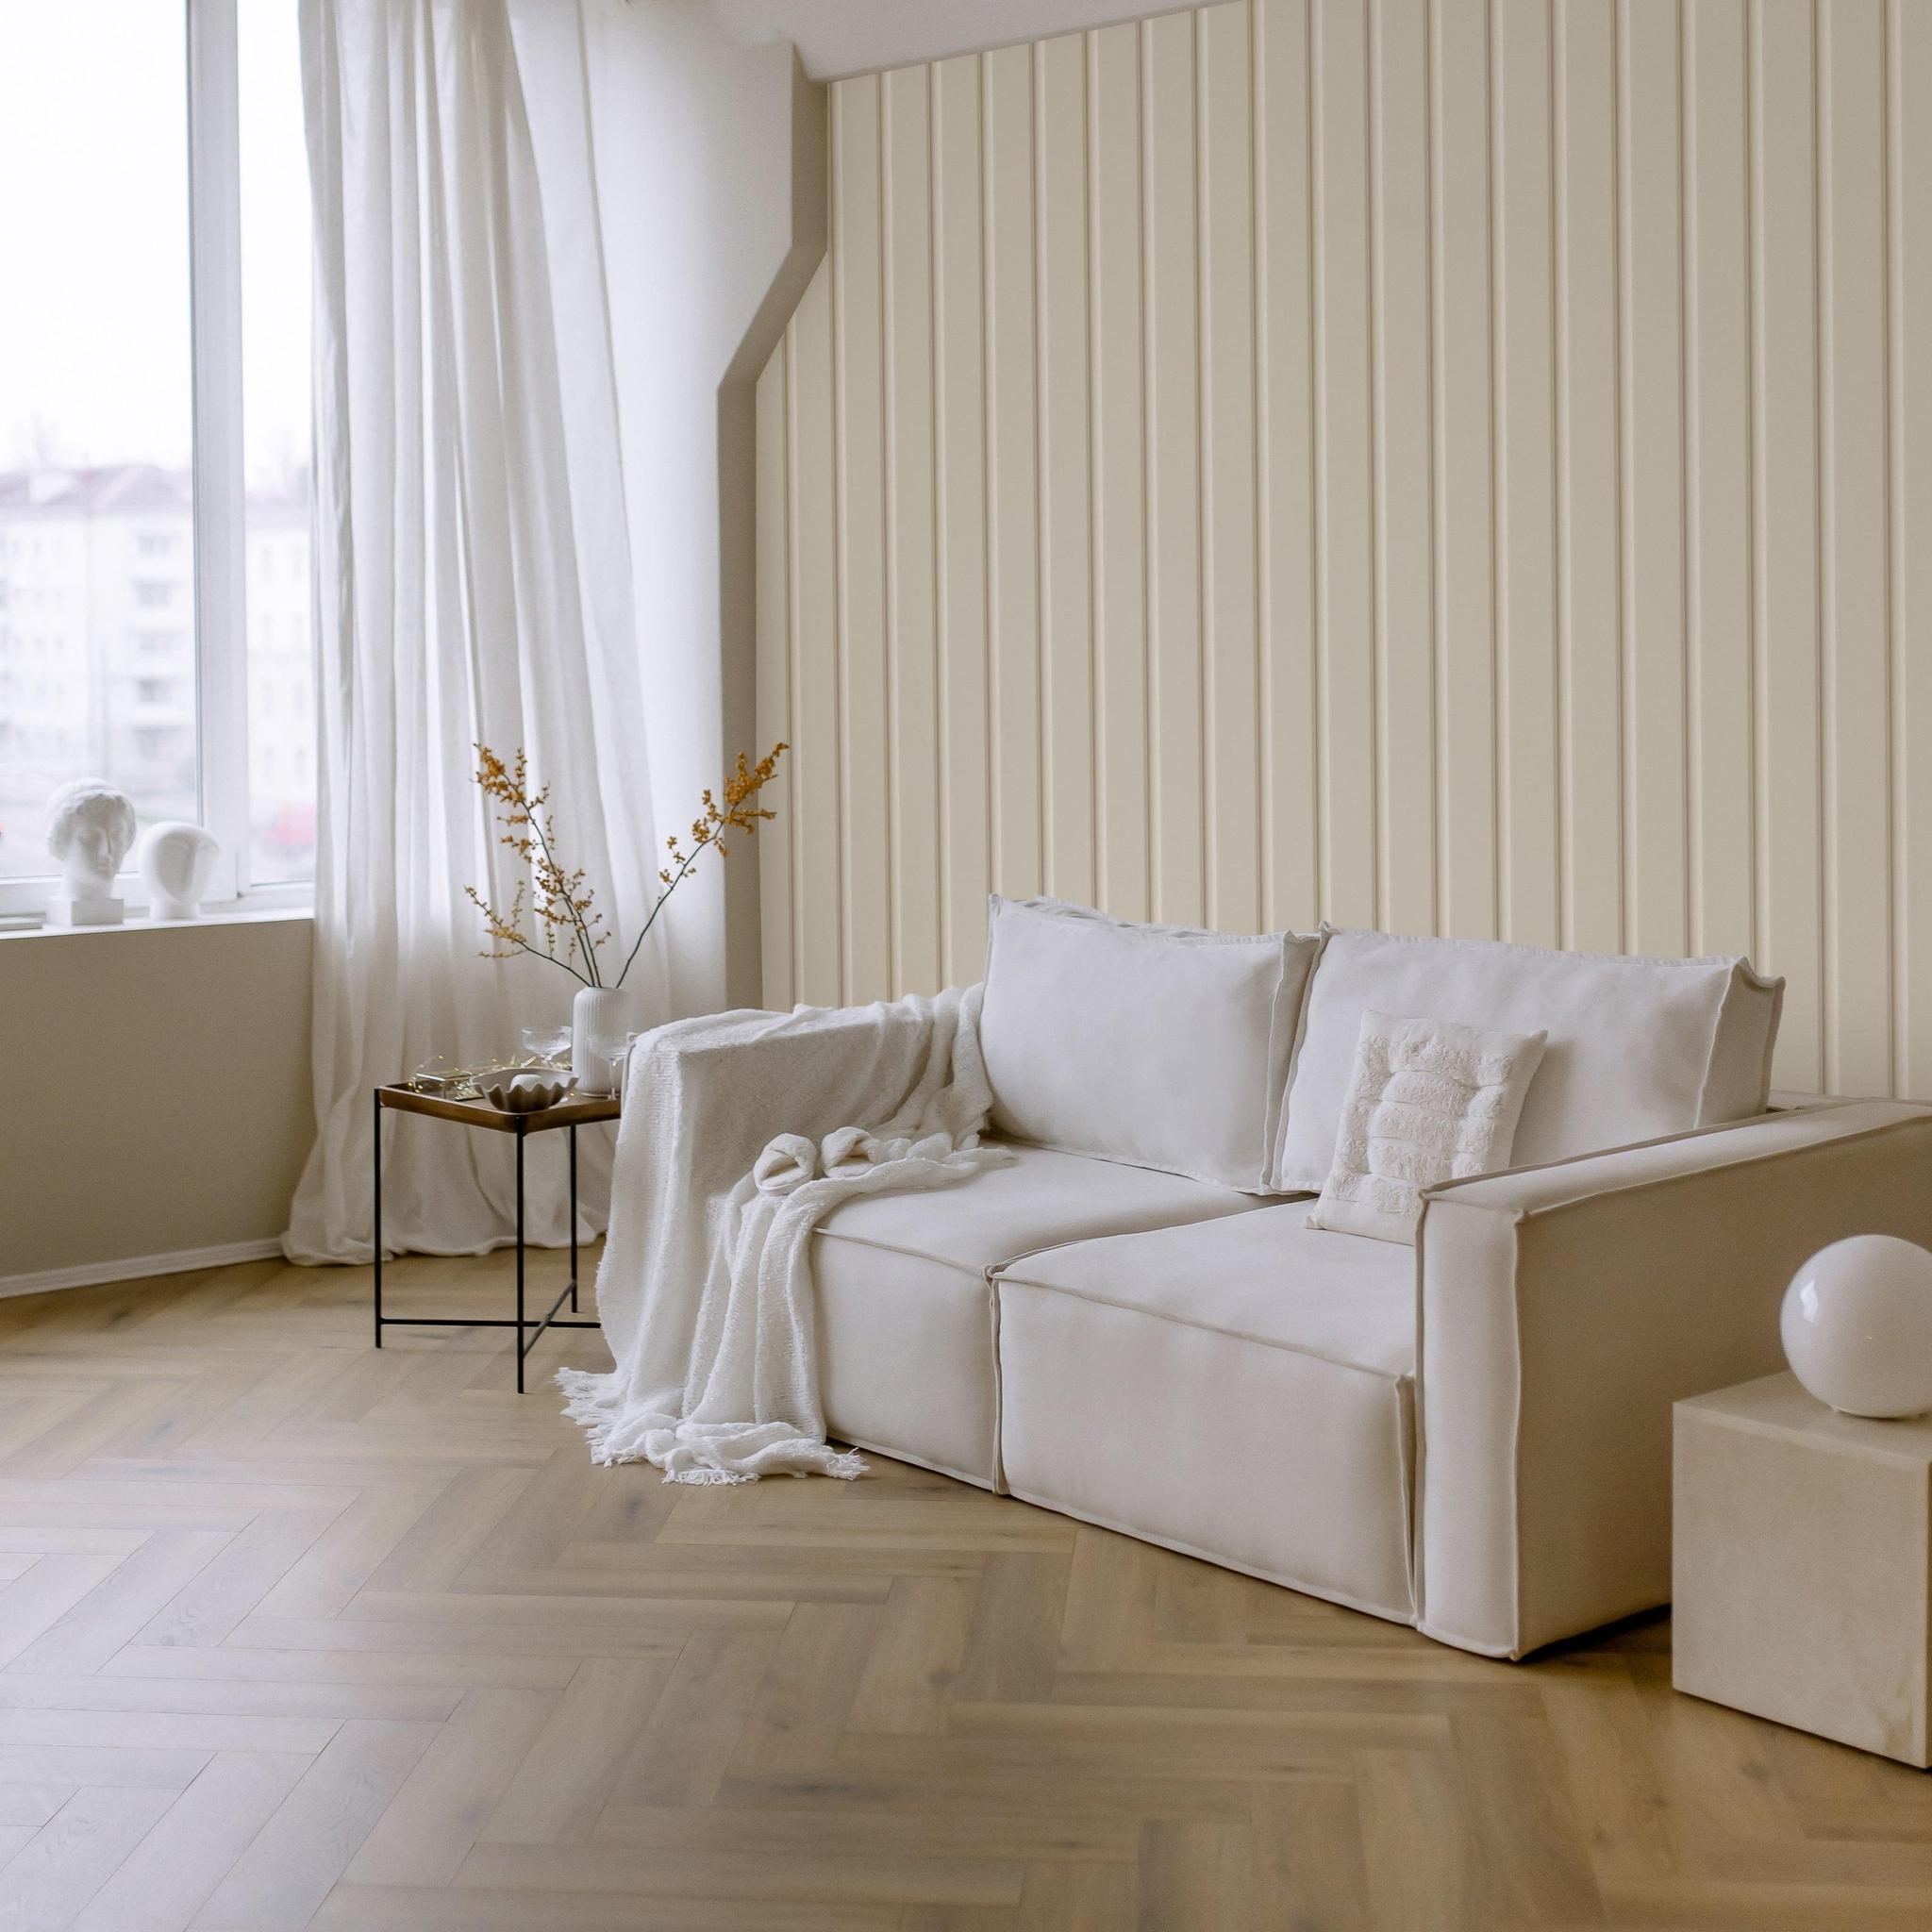 Minimalist living room showcasing the elegant Allison Wallpaper by Wall Blush SG02 with neutral tones.
